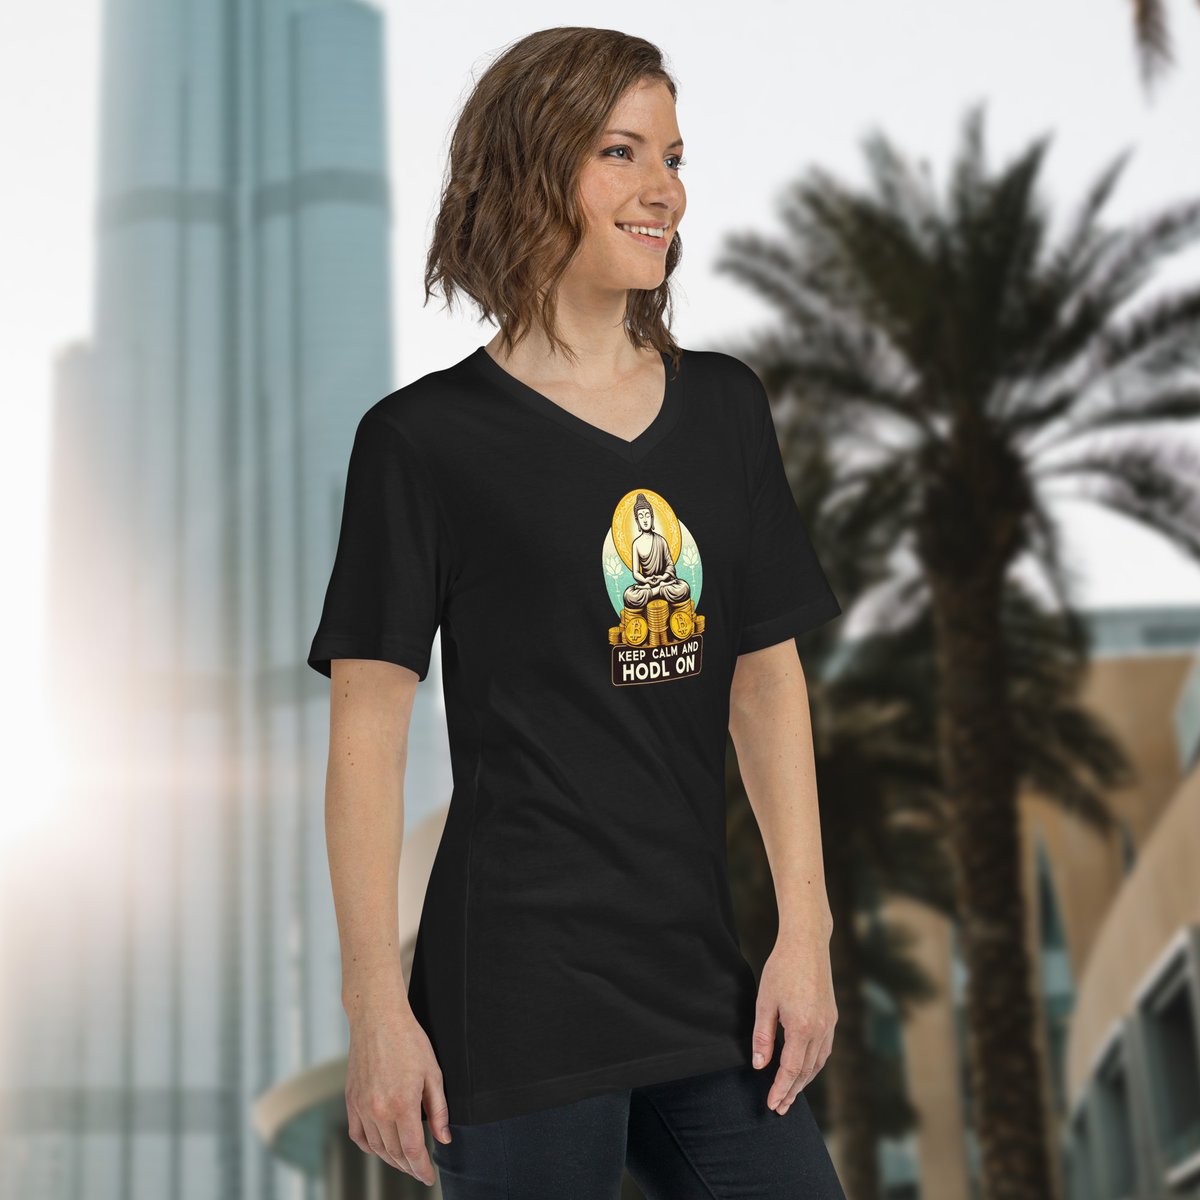 Channel serenity and strength with our 'Buddha Hodler' T-Shirts for women! 🧘‍♀️💹💰👕

bitcoinagora.shop/collections/bu…

#bitcoinagora
#cryptotrading
#apparel
#buddha
#buddhahodler
#fashionclothing
#bitcoin
#satoshi
#cryptoapparel
#cryptoclothing
#cryptofashion
#womenshirts
#tshirts